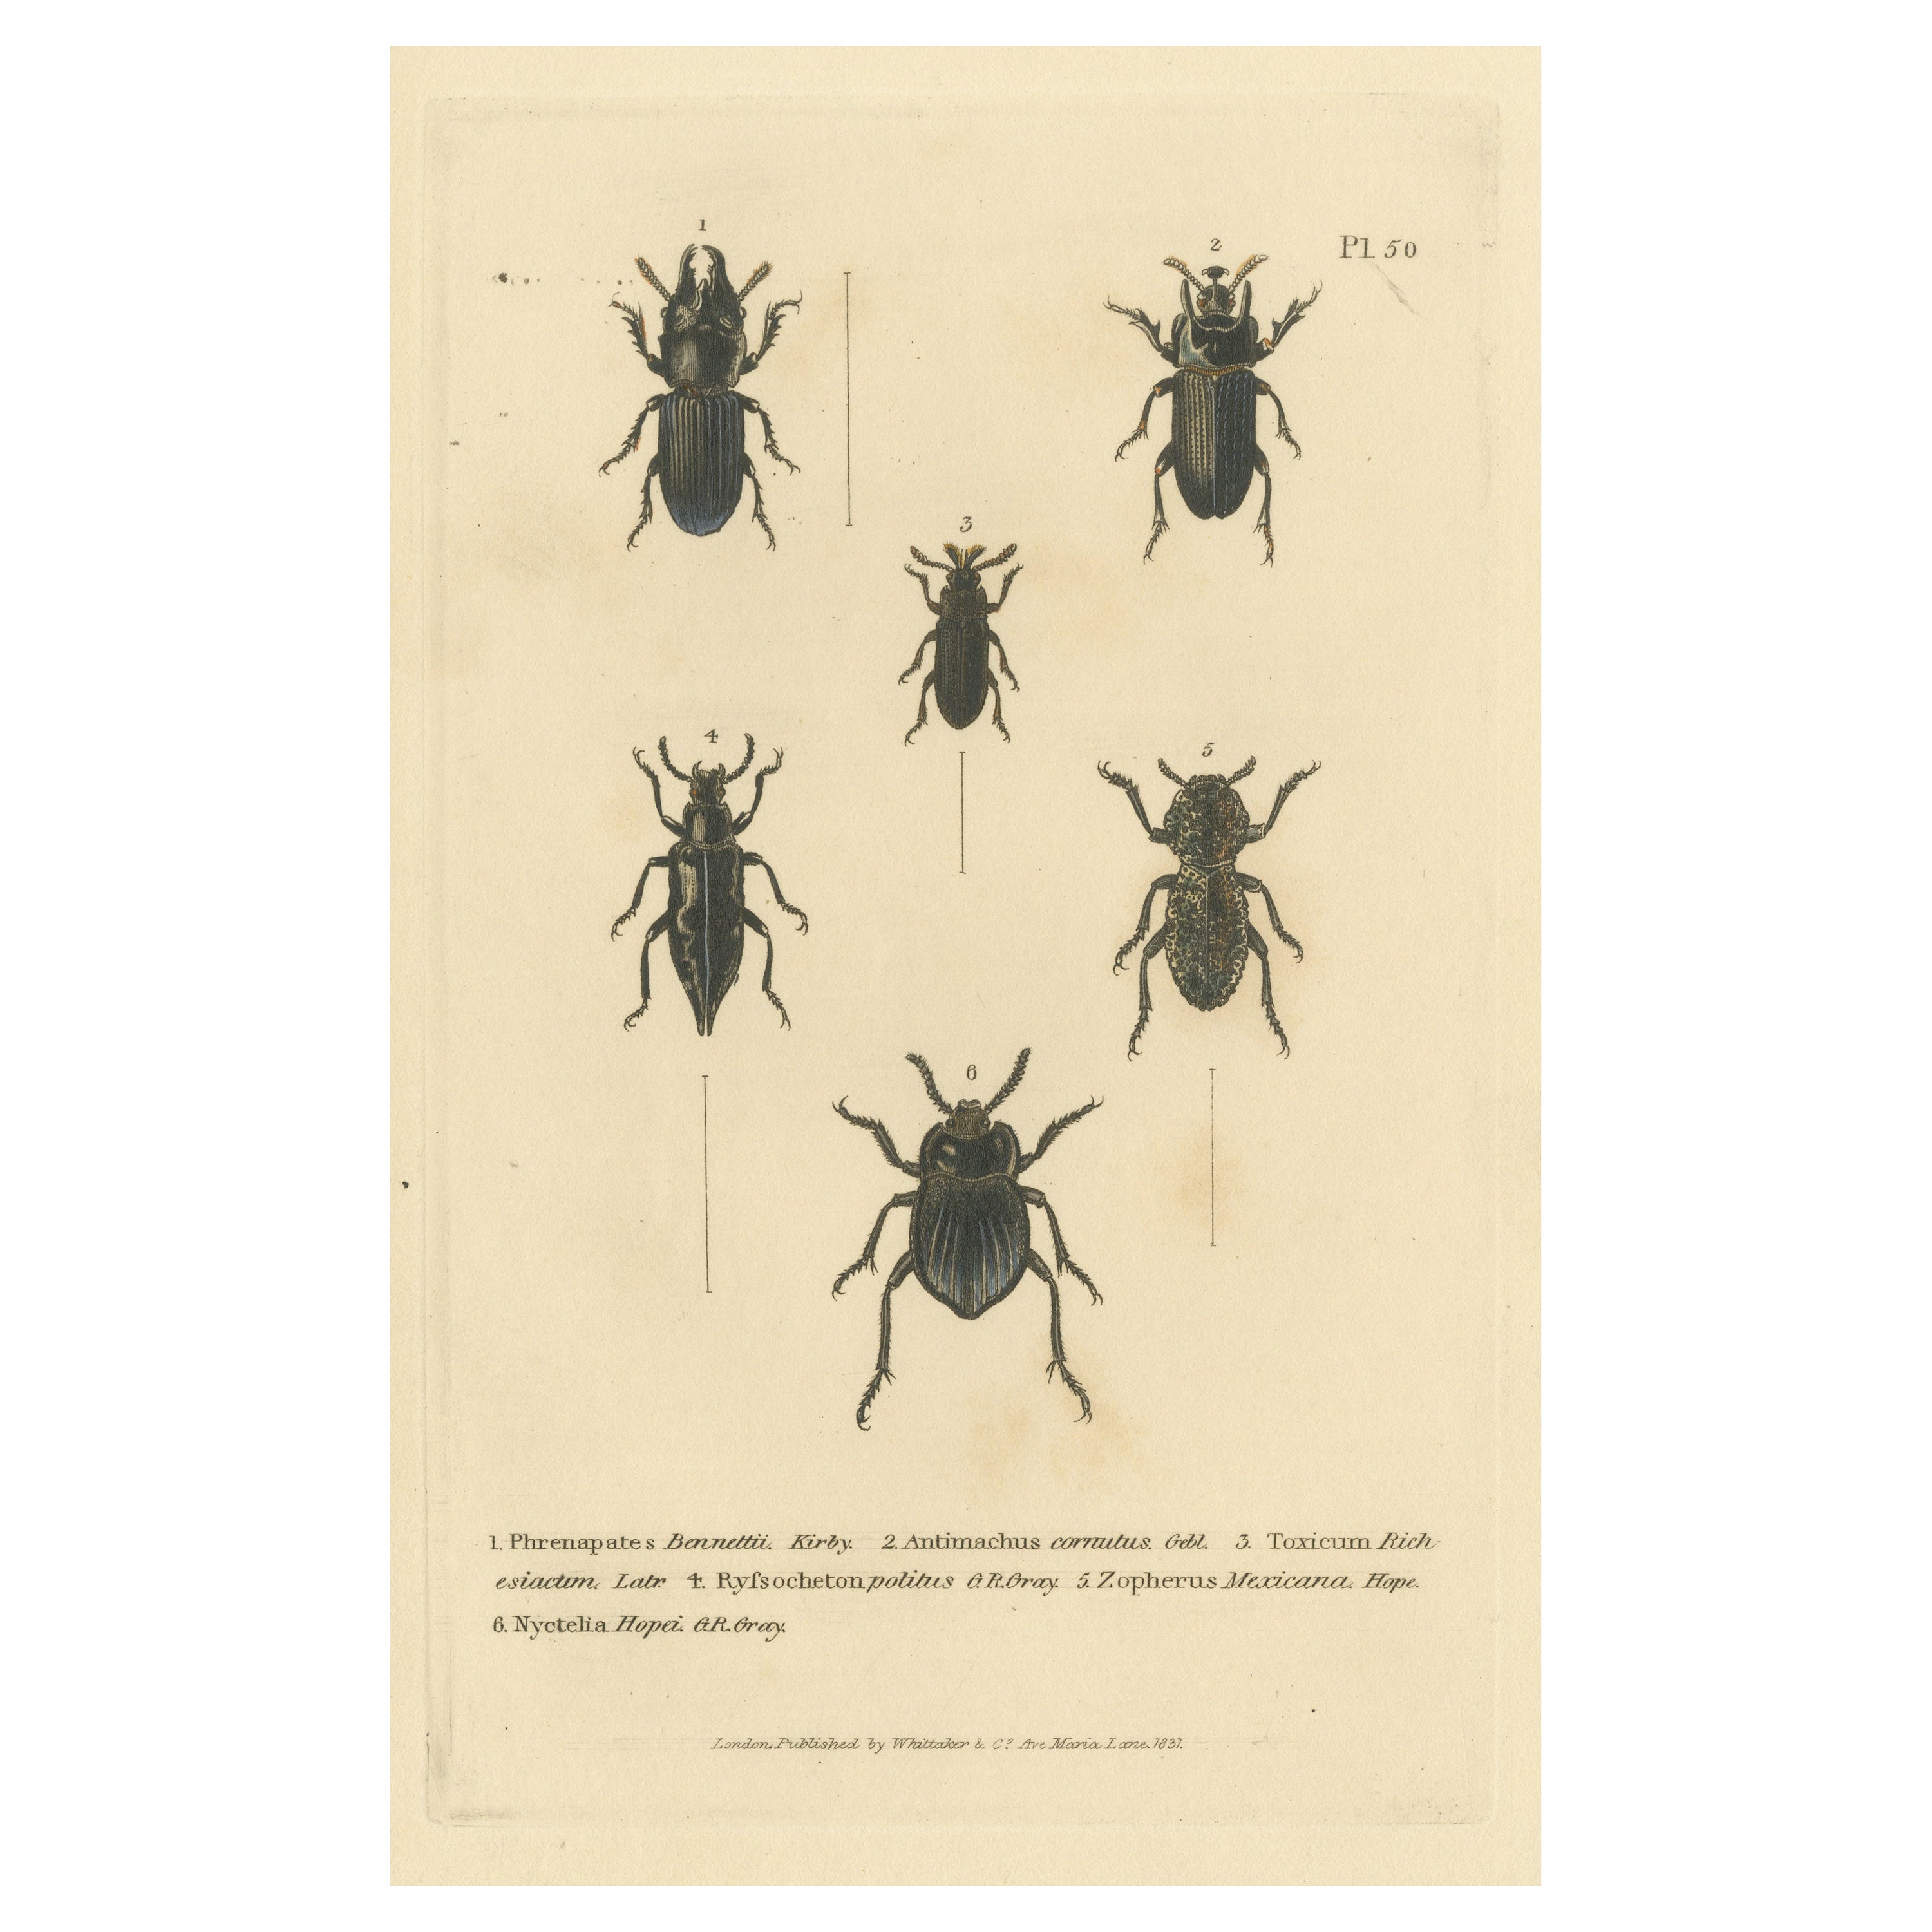 Beetles of the Early 19th Century: A Cuvier Collection from 'The Animal Kingdom' For Sale